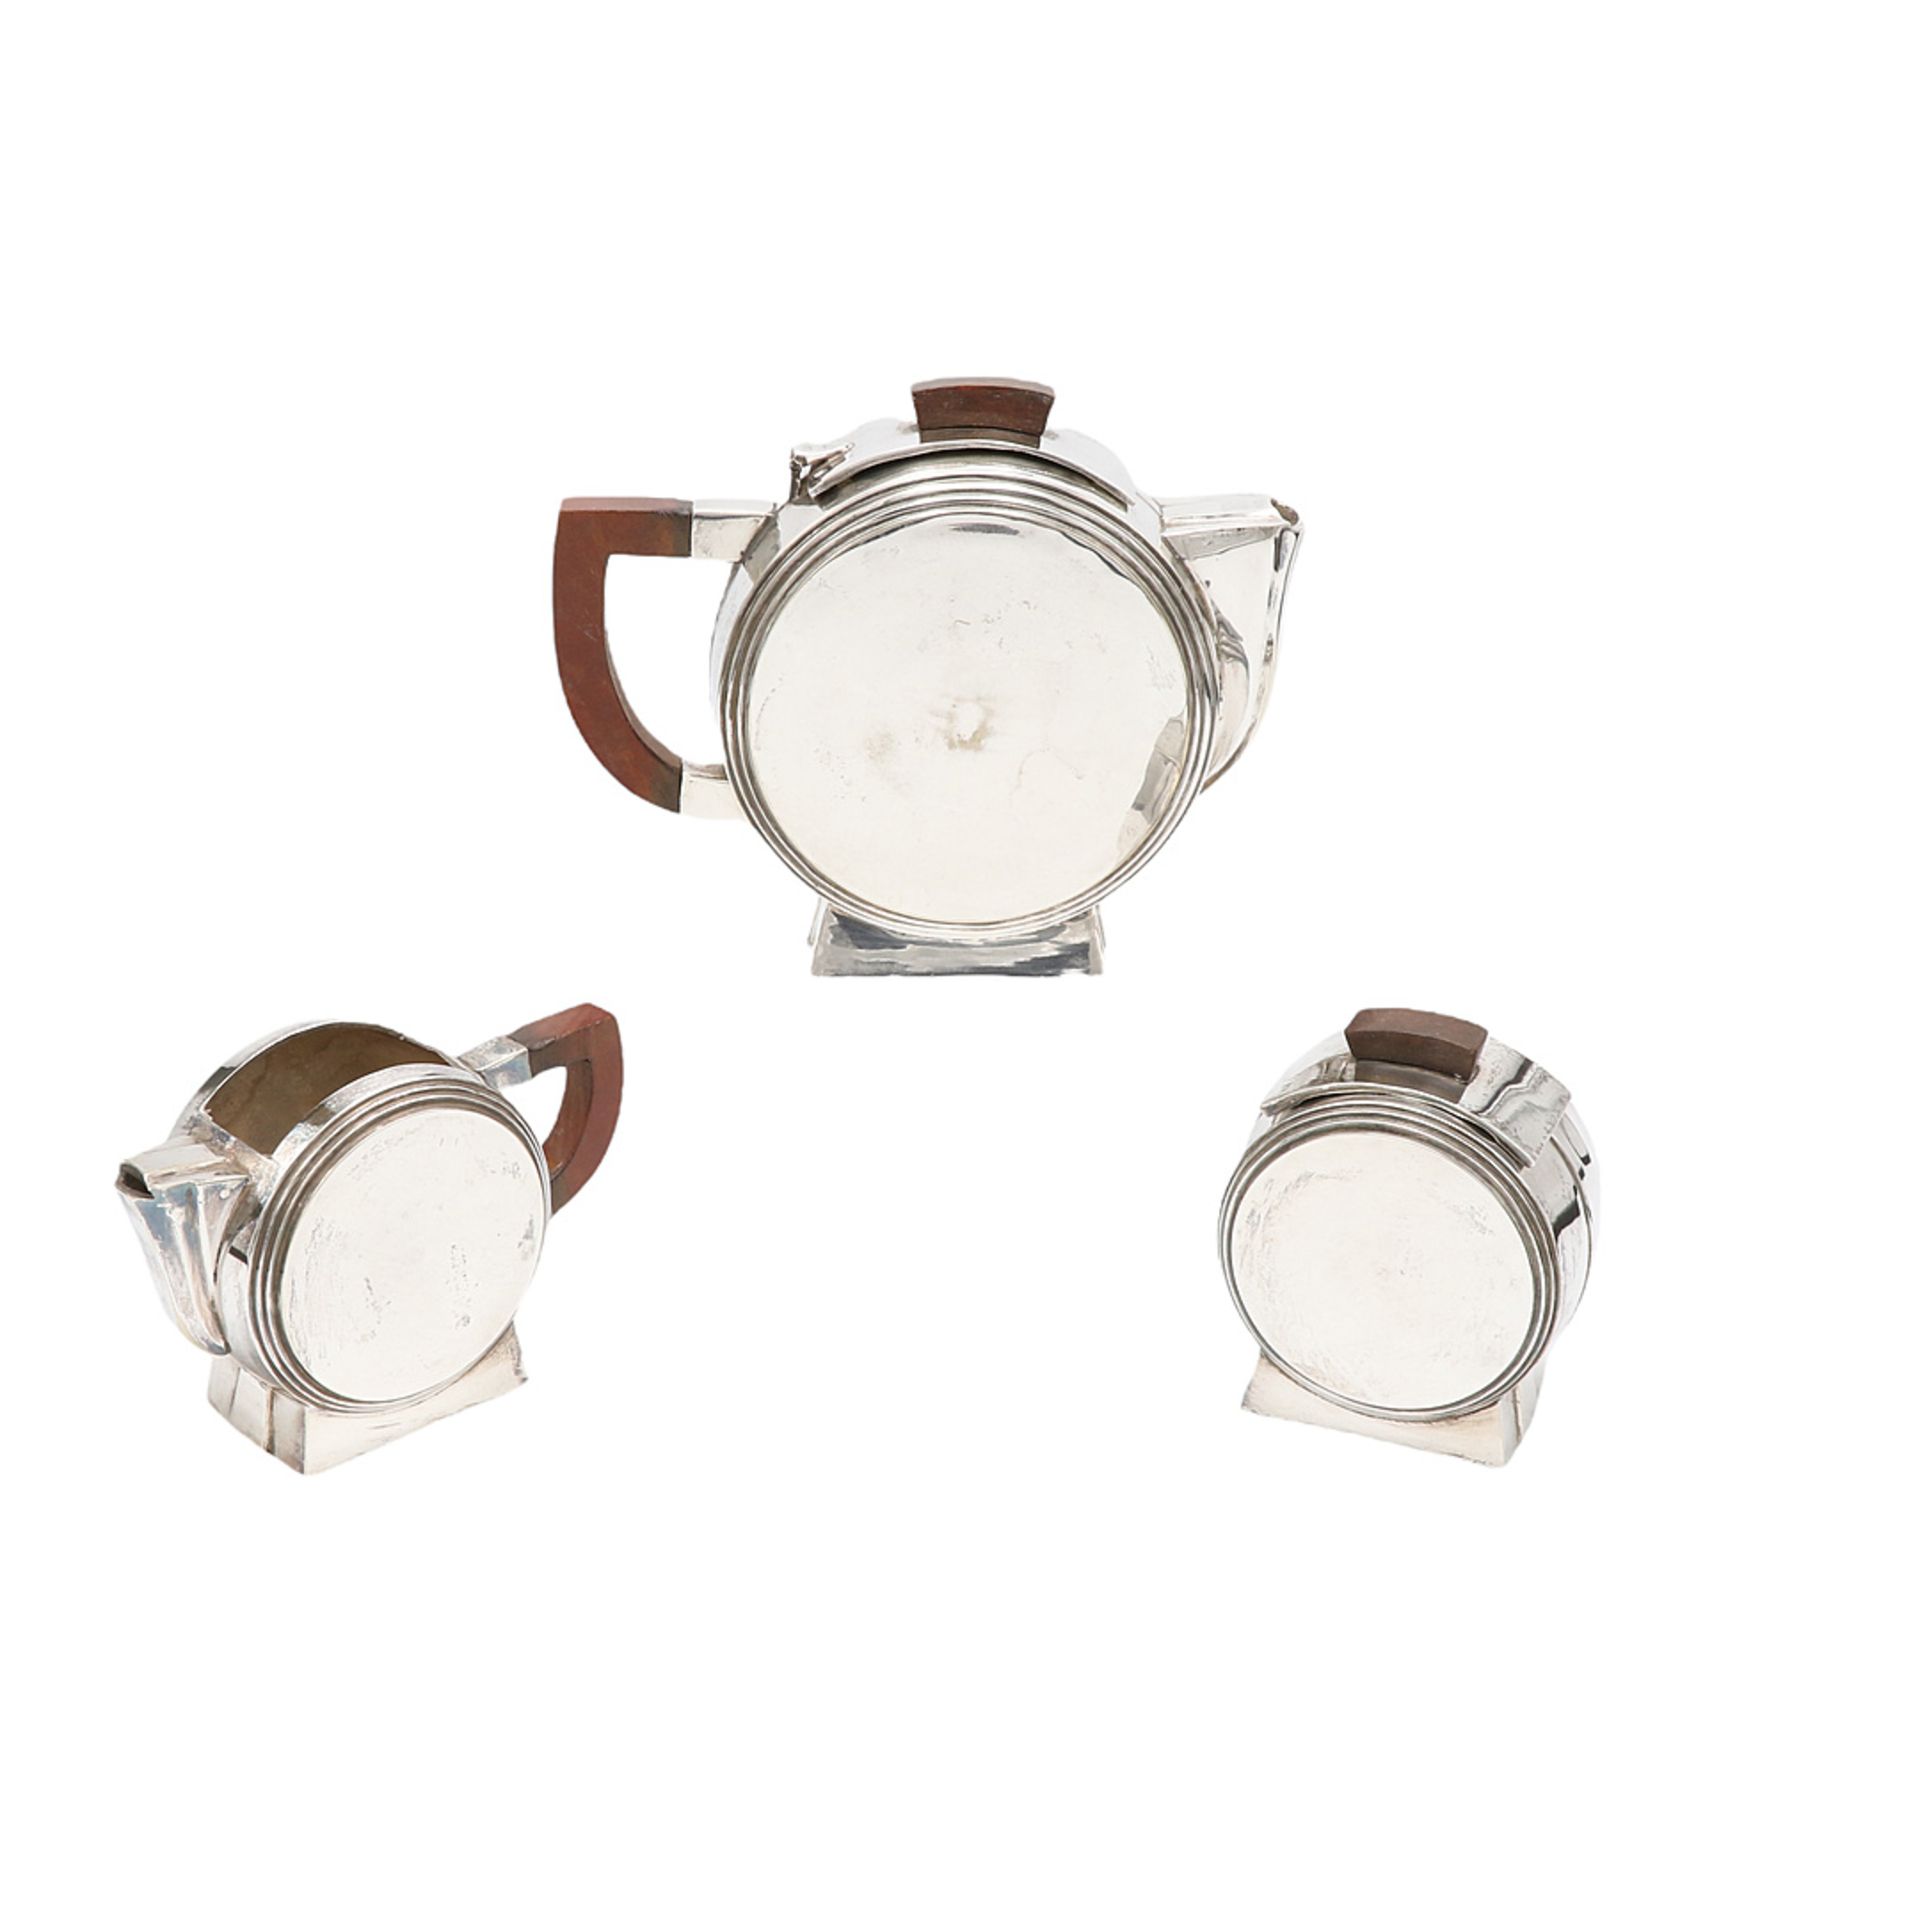 Three-piece tea or coffee service, probably France, Art Deco style - Image 2 of 2